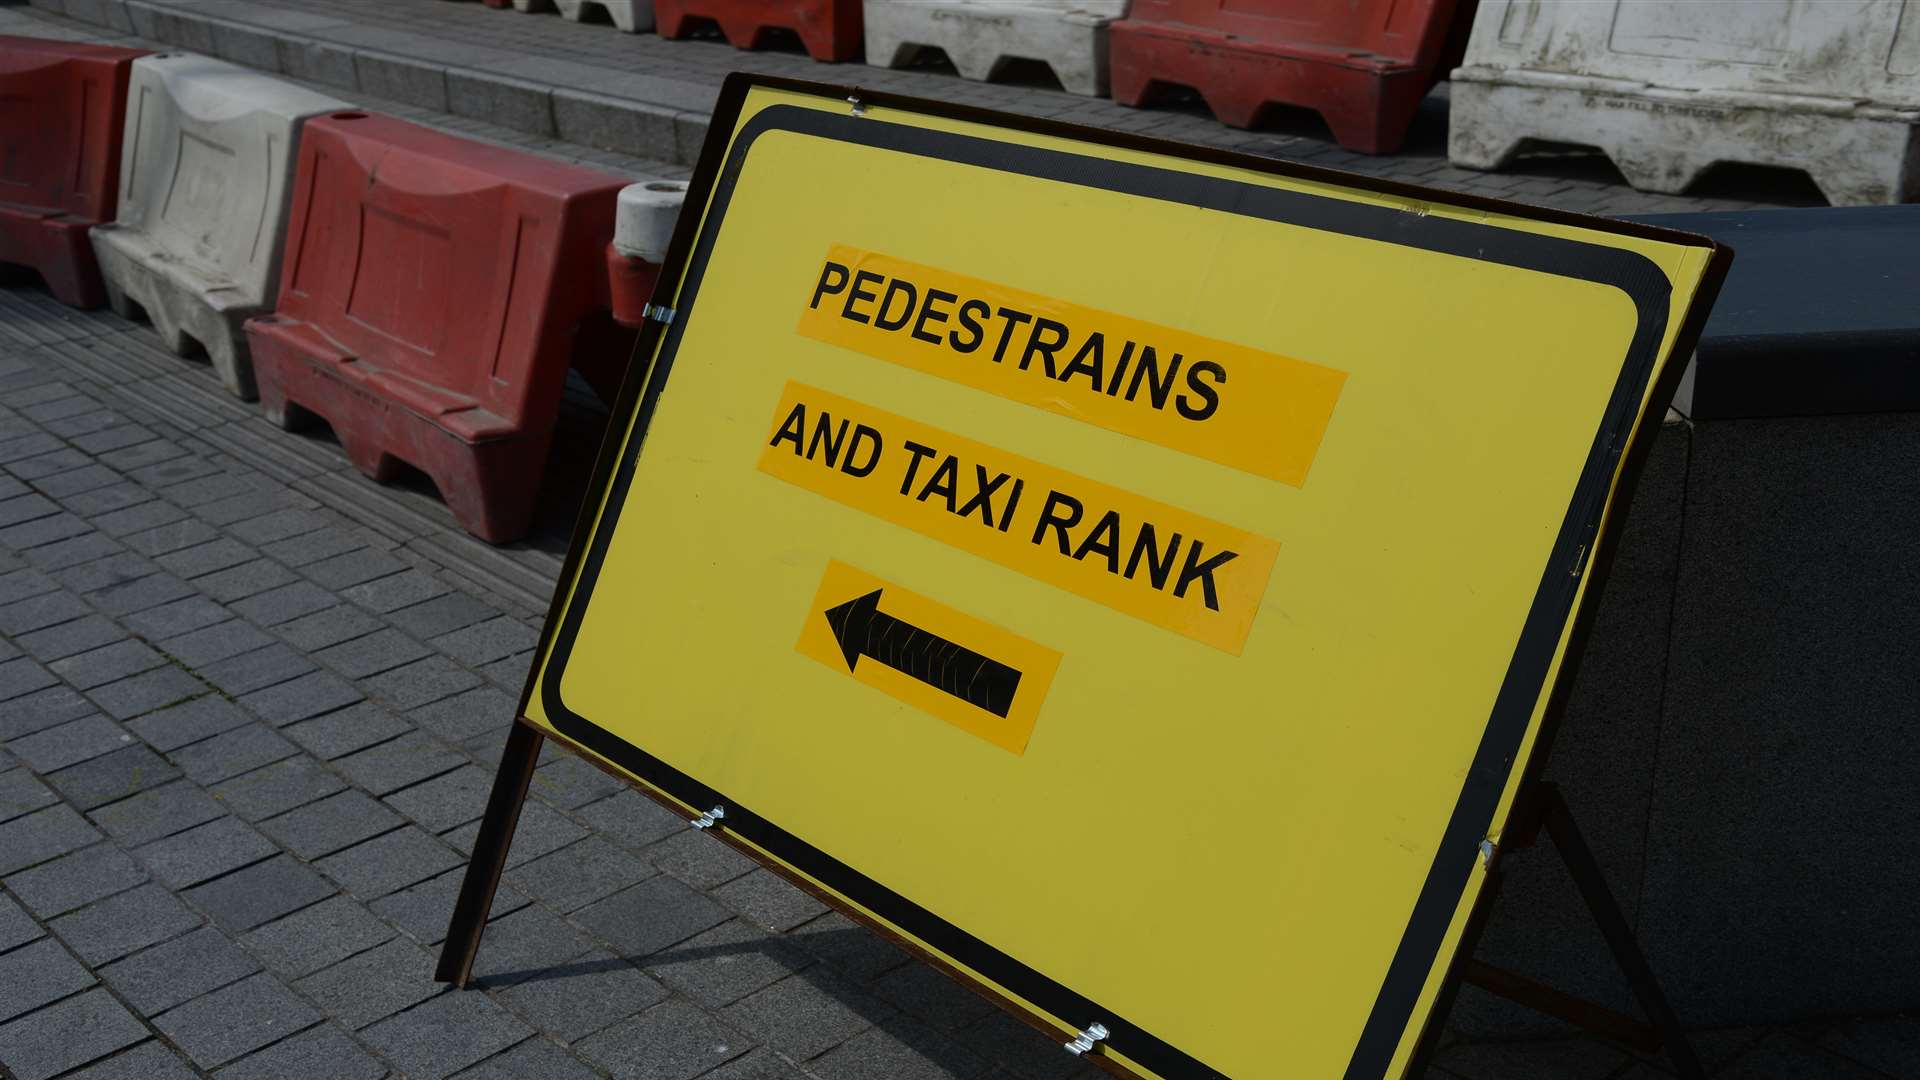 "Pedestrains" has been spotted on two different signs